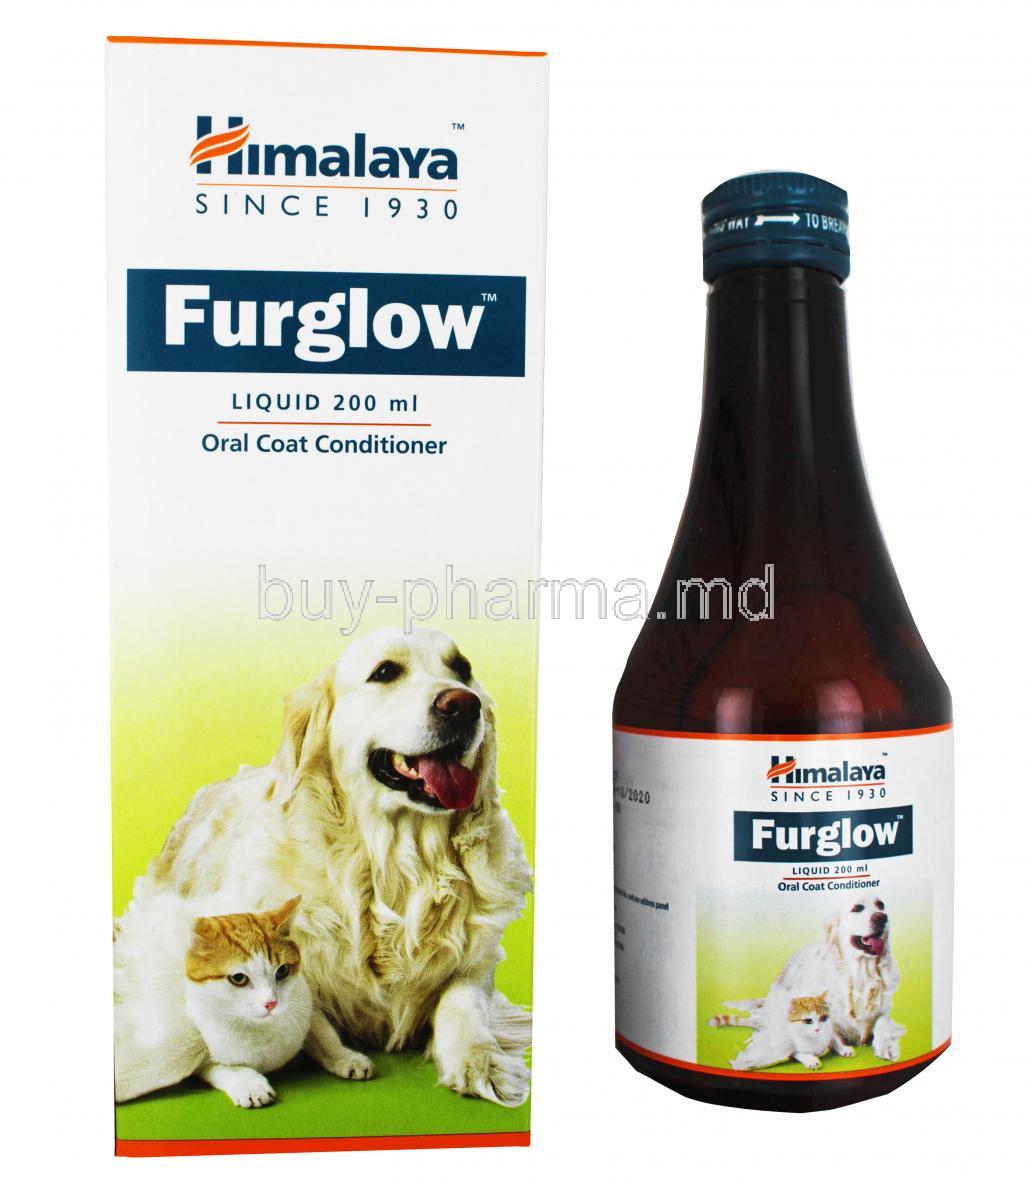 Furglow Oral Coat Conditioner for Pets box and bottle